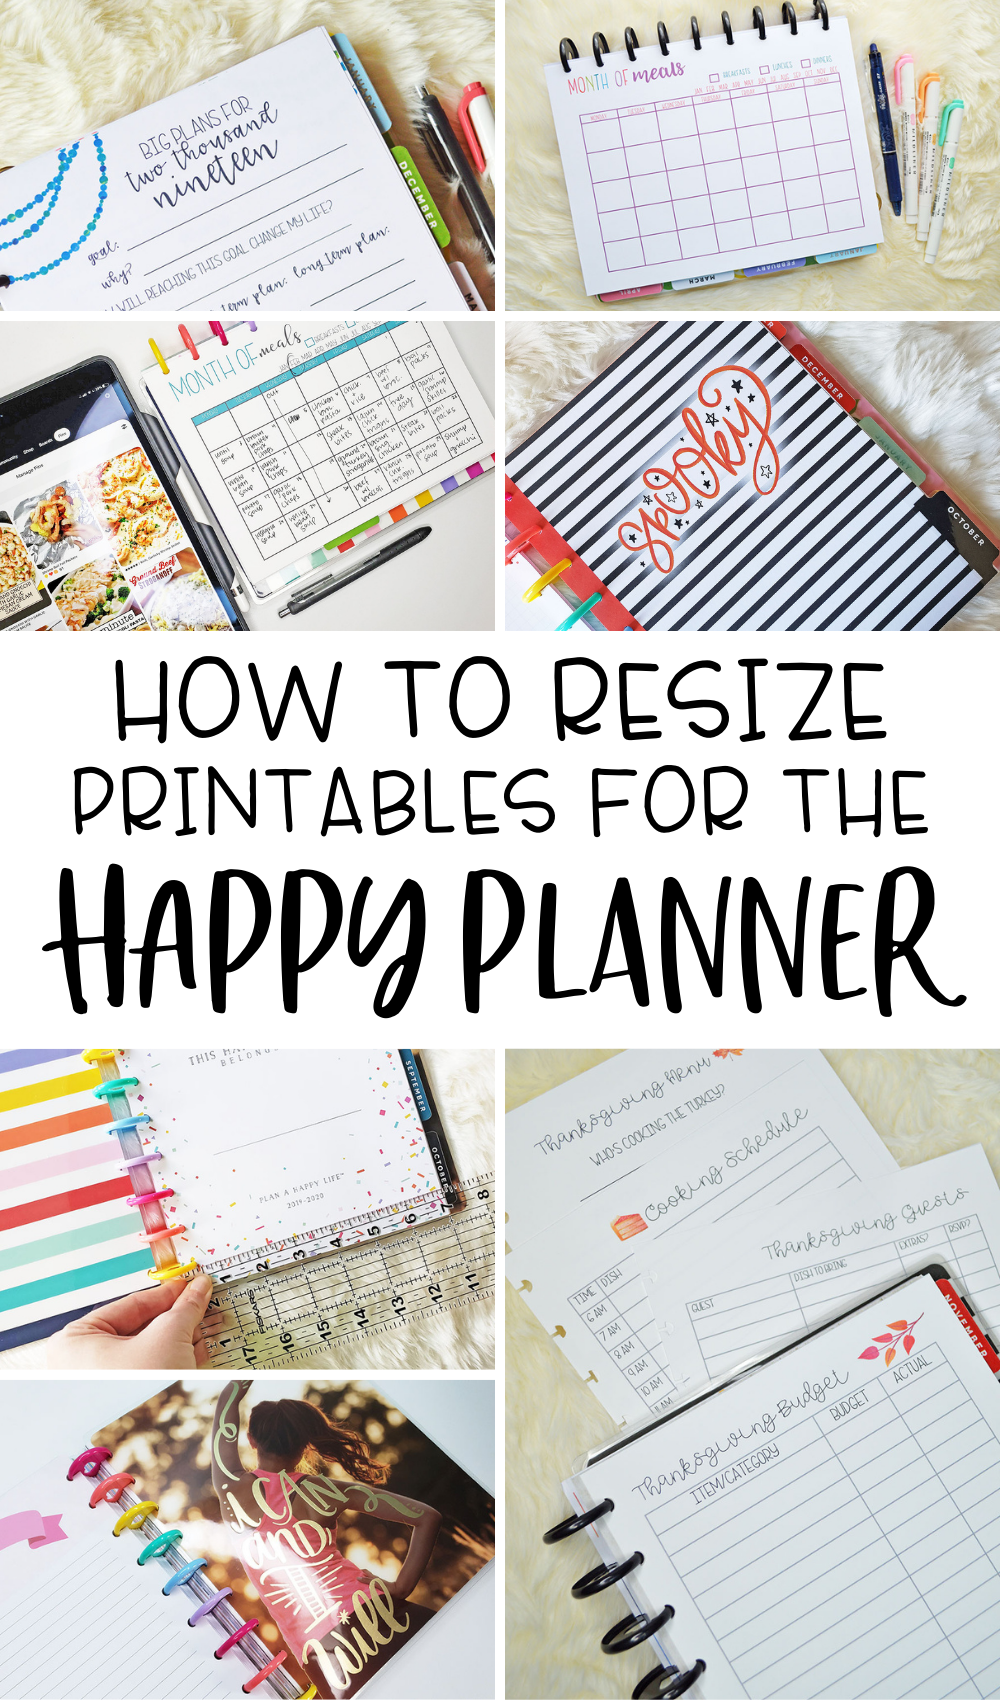 How to Resize Printables for the Classic Happy Planner